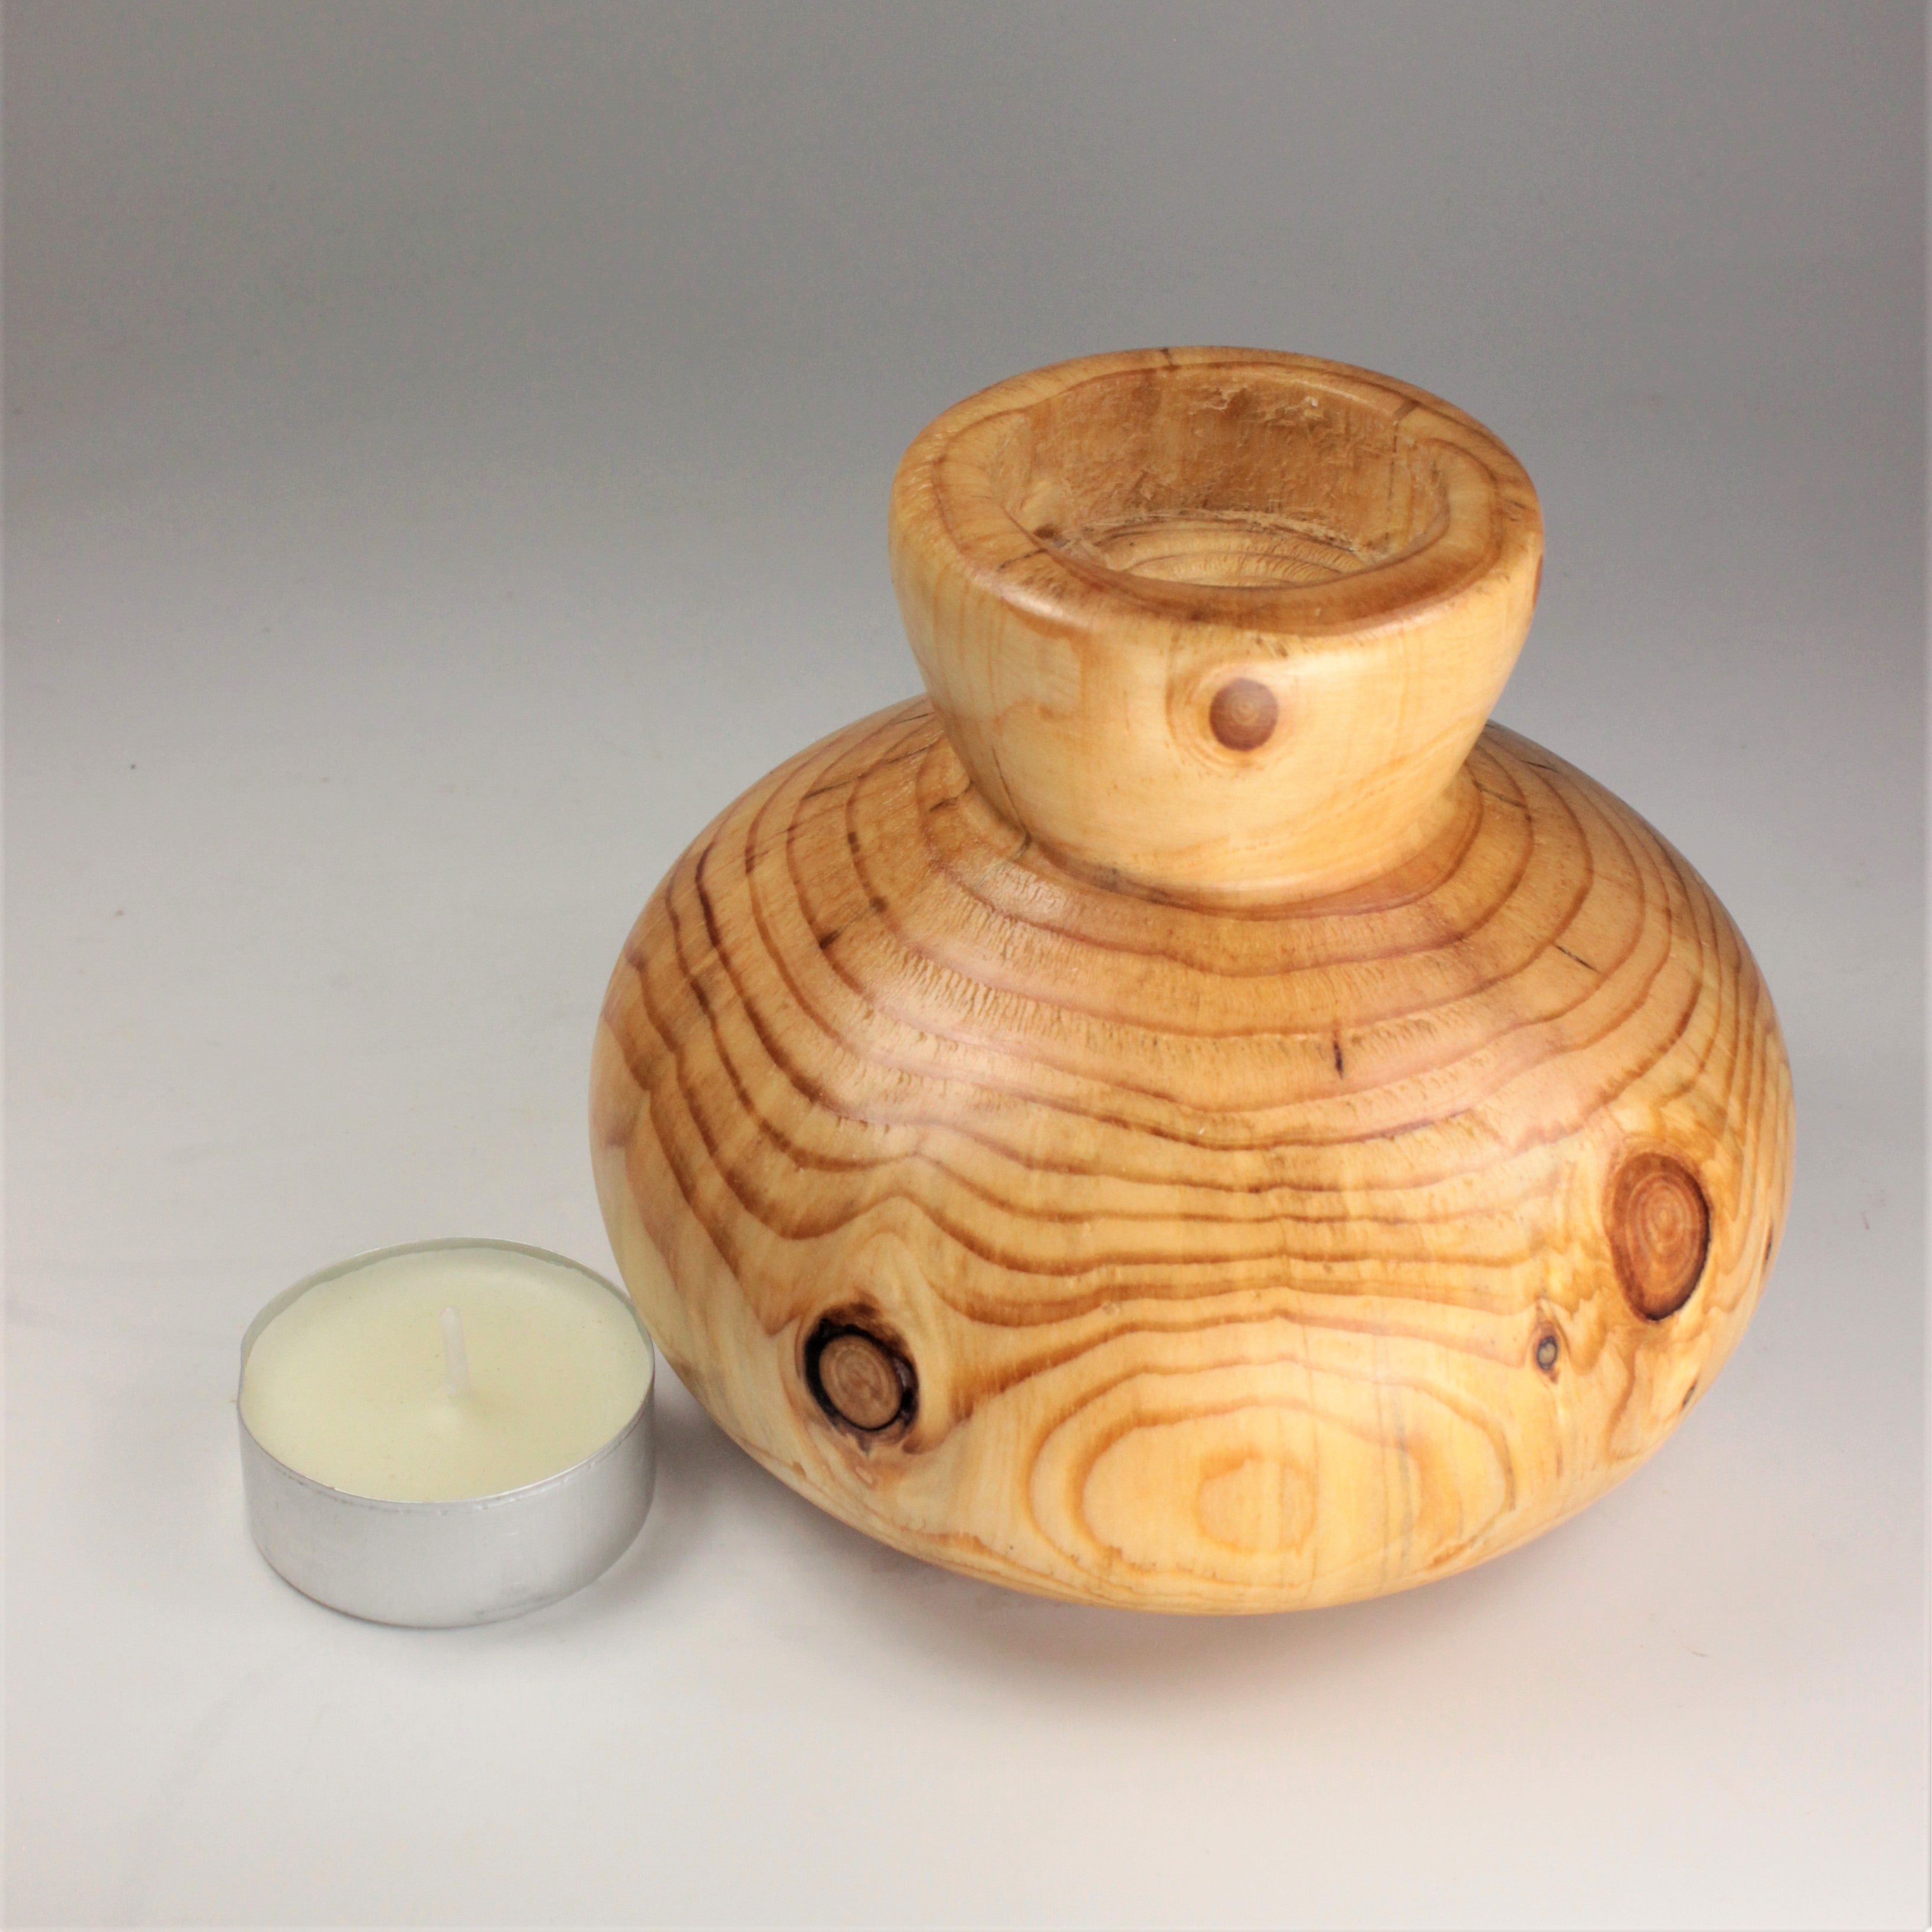 Cypress candle holder